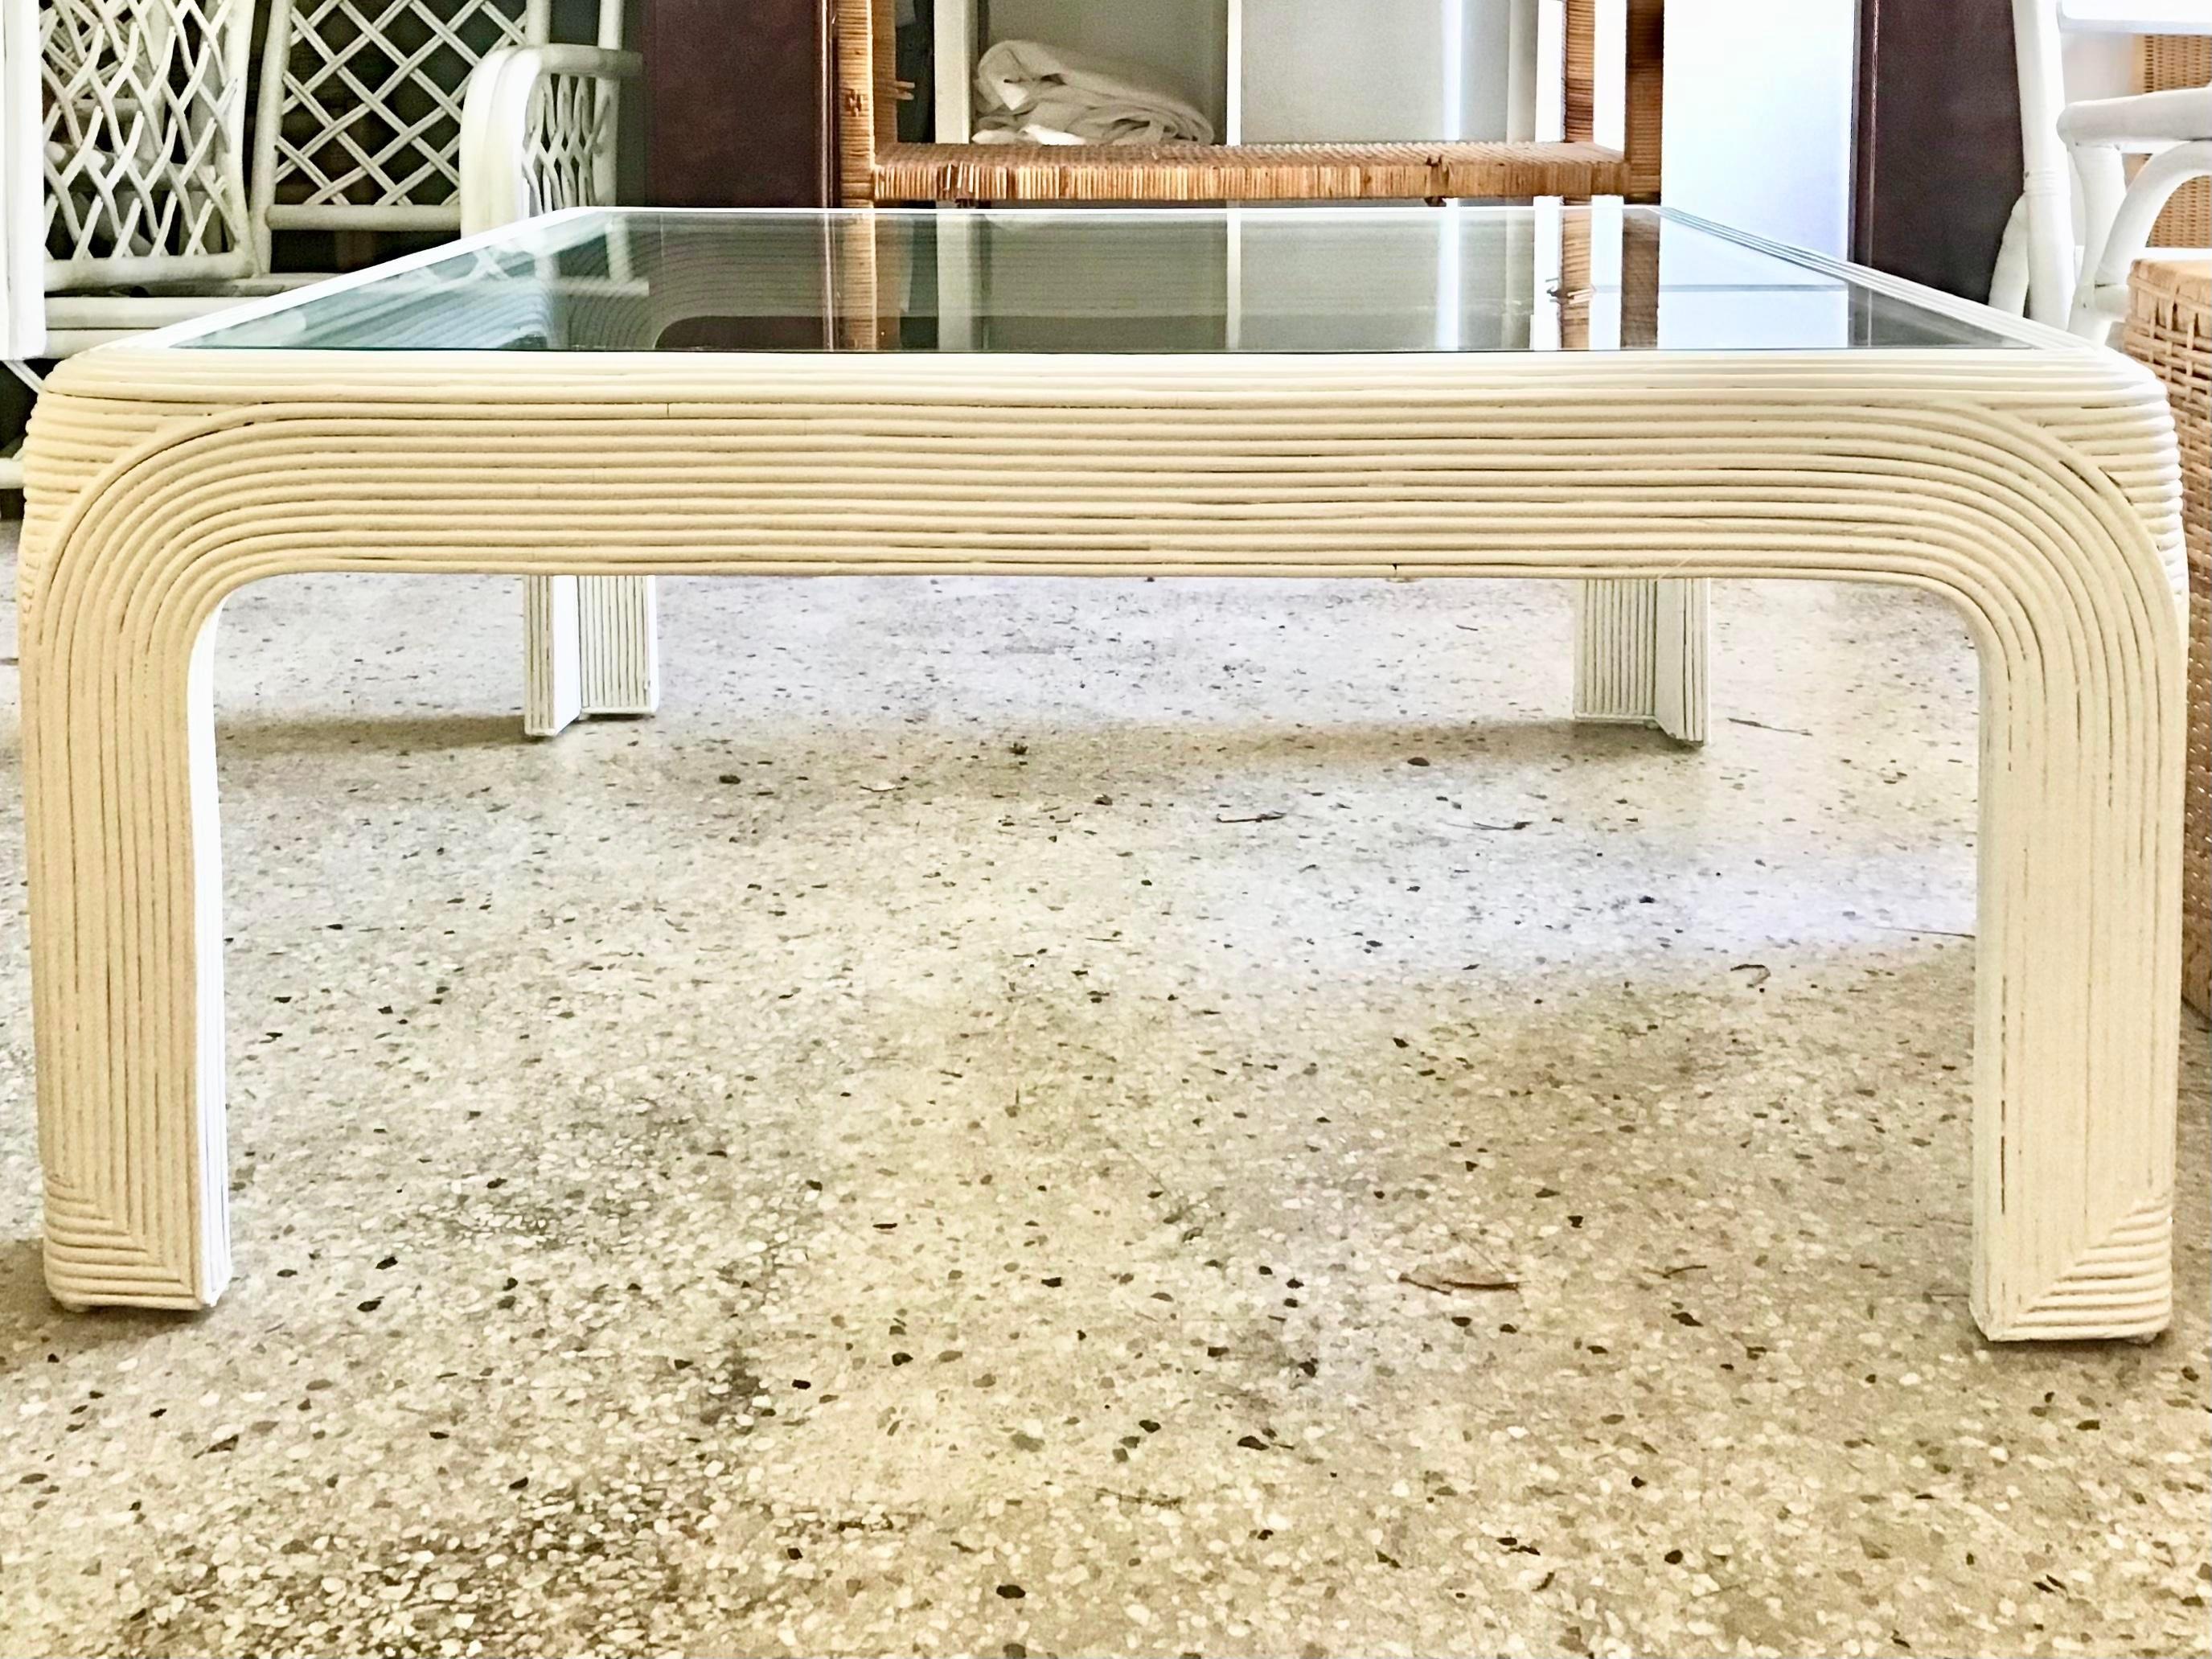 Boho chic pencil reed rattan square coffee table in the style of Gabriella Crespi, circa 1970s newly lacquered in white with a new glass top. A great addition to your boho chic inspired interiors.